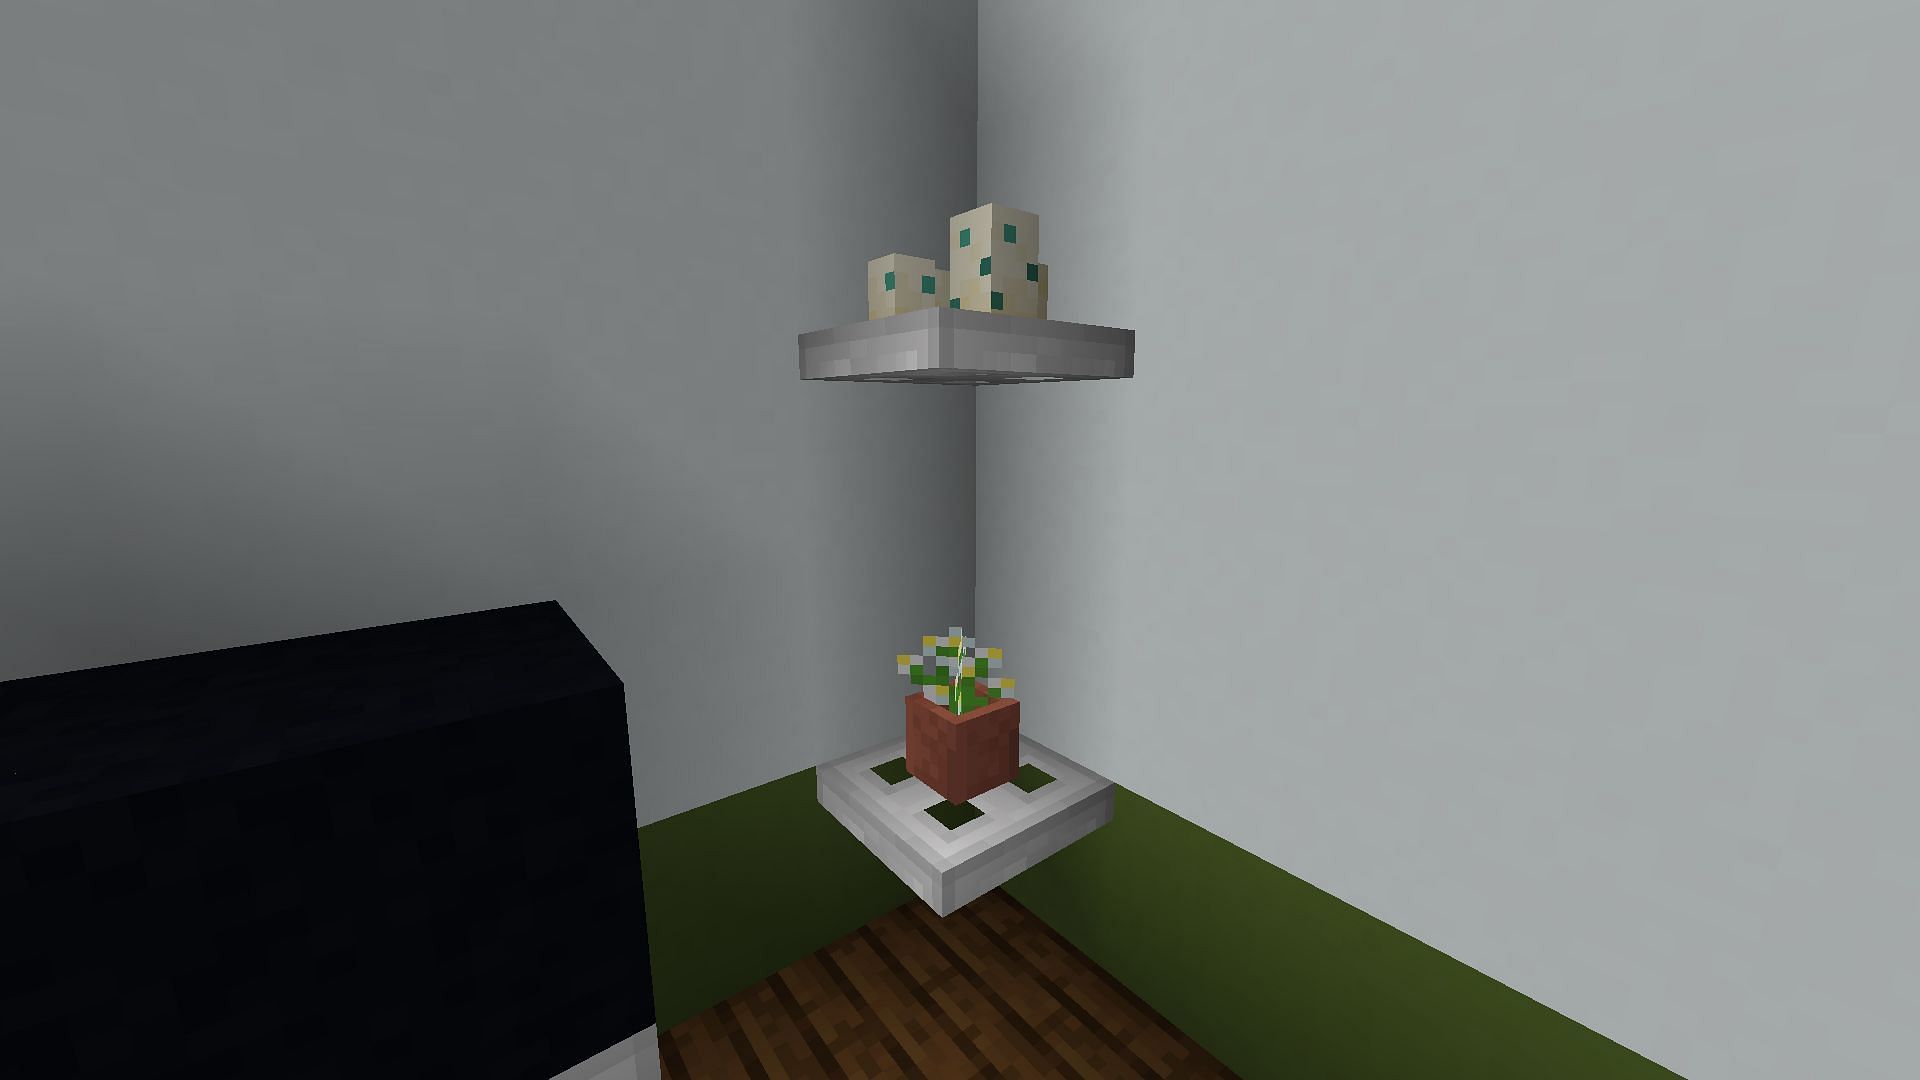 Shelves made with trapdoors (Image via Minecraft Furniture)